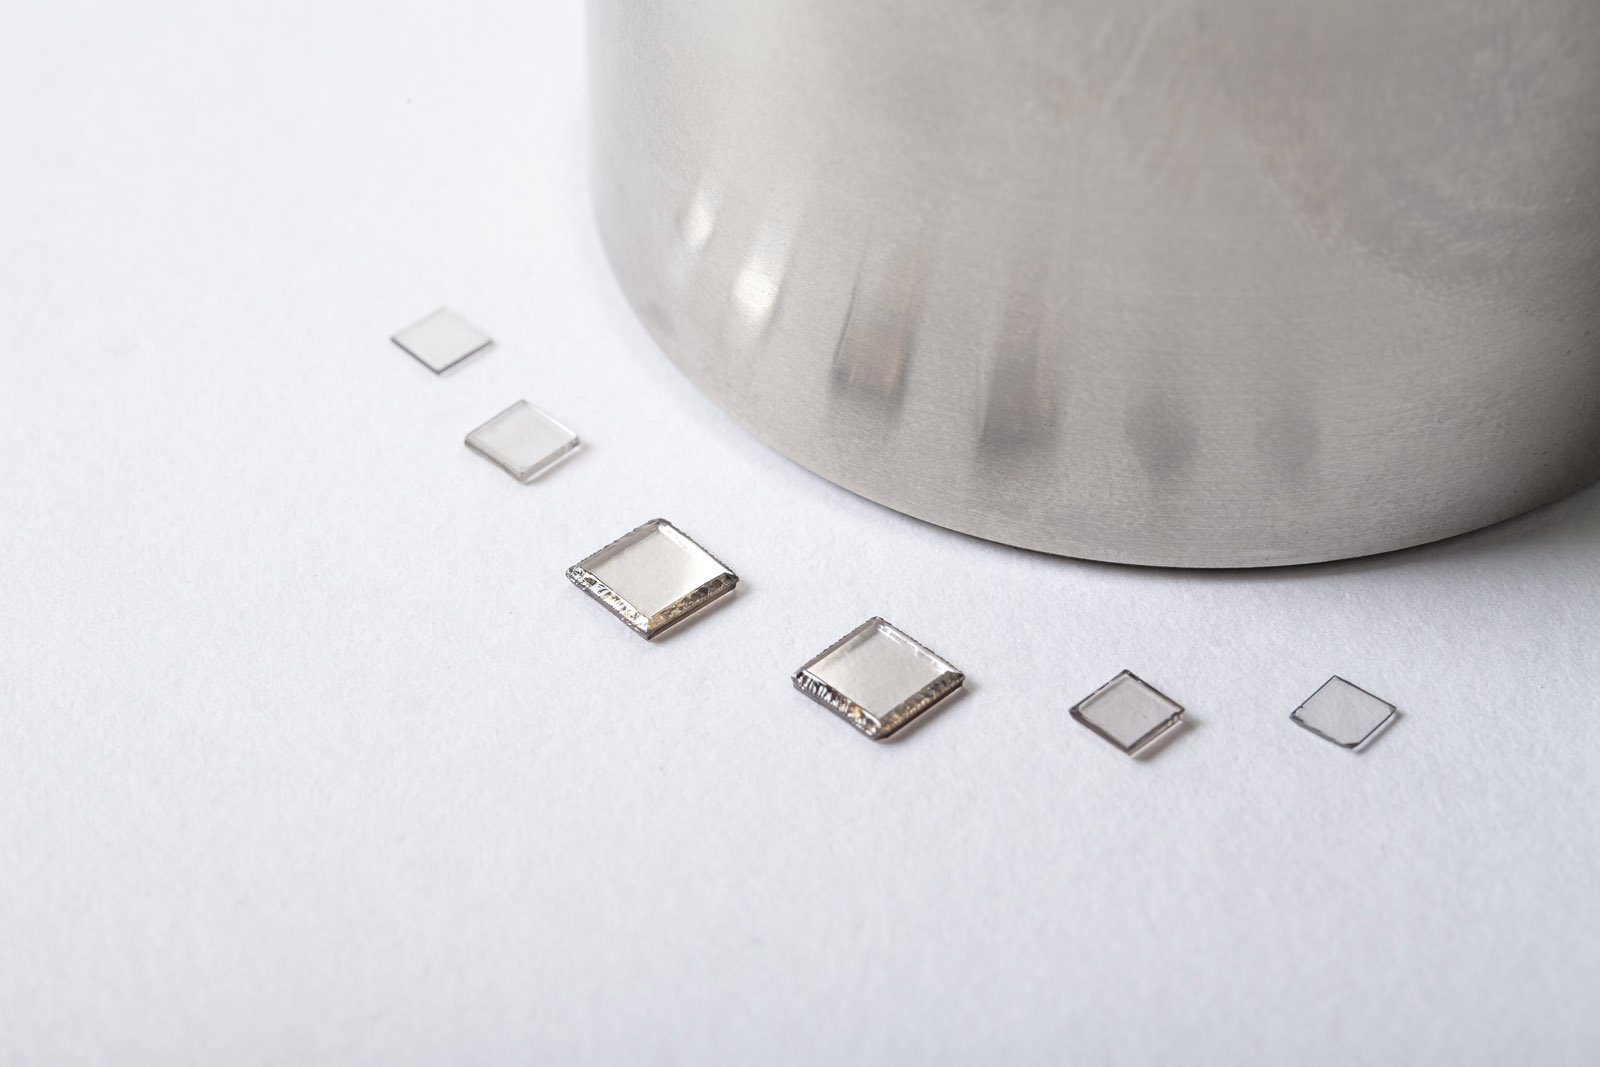 Ultra-pure diamonds produced at Fraunhofer IAF for quantum applications.